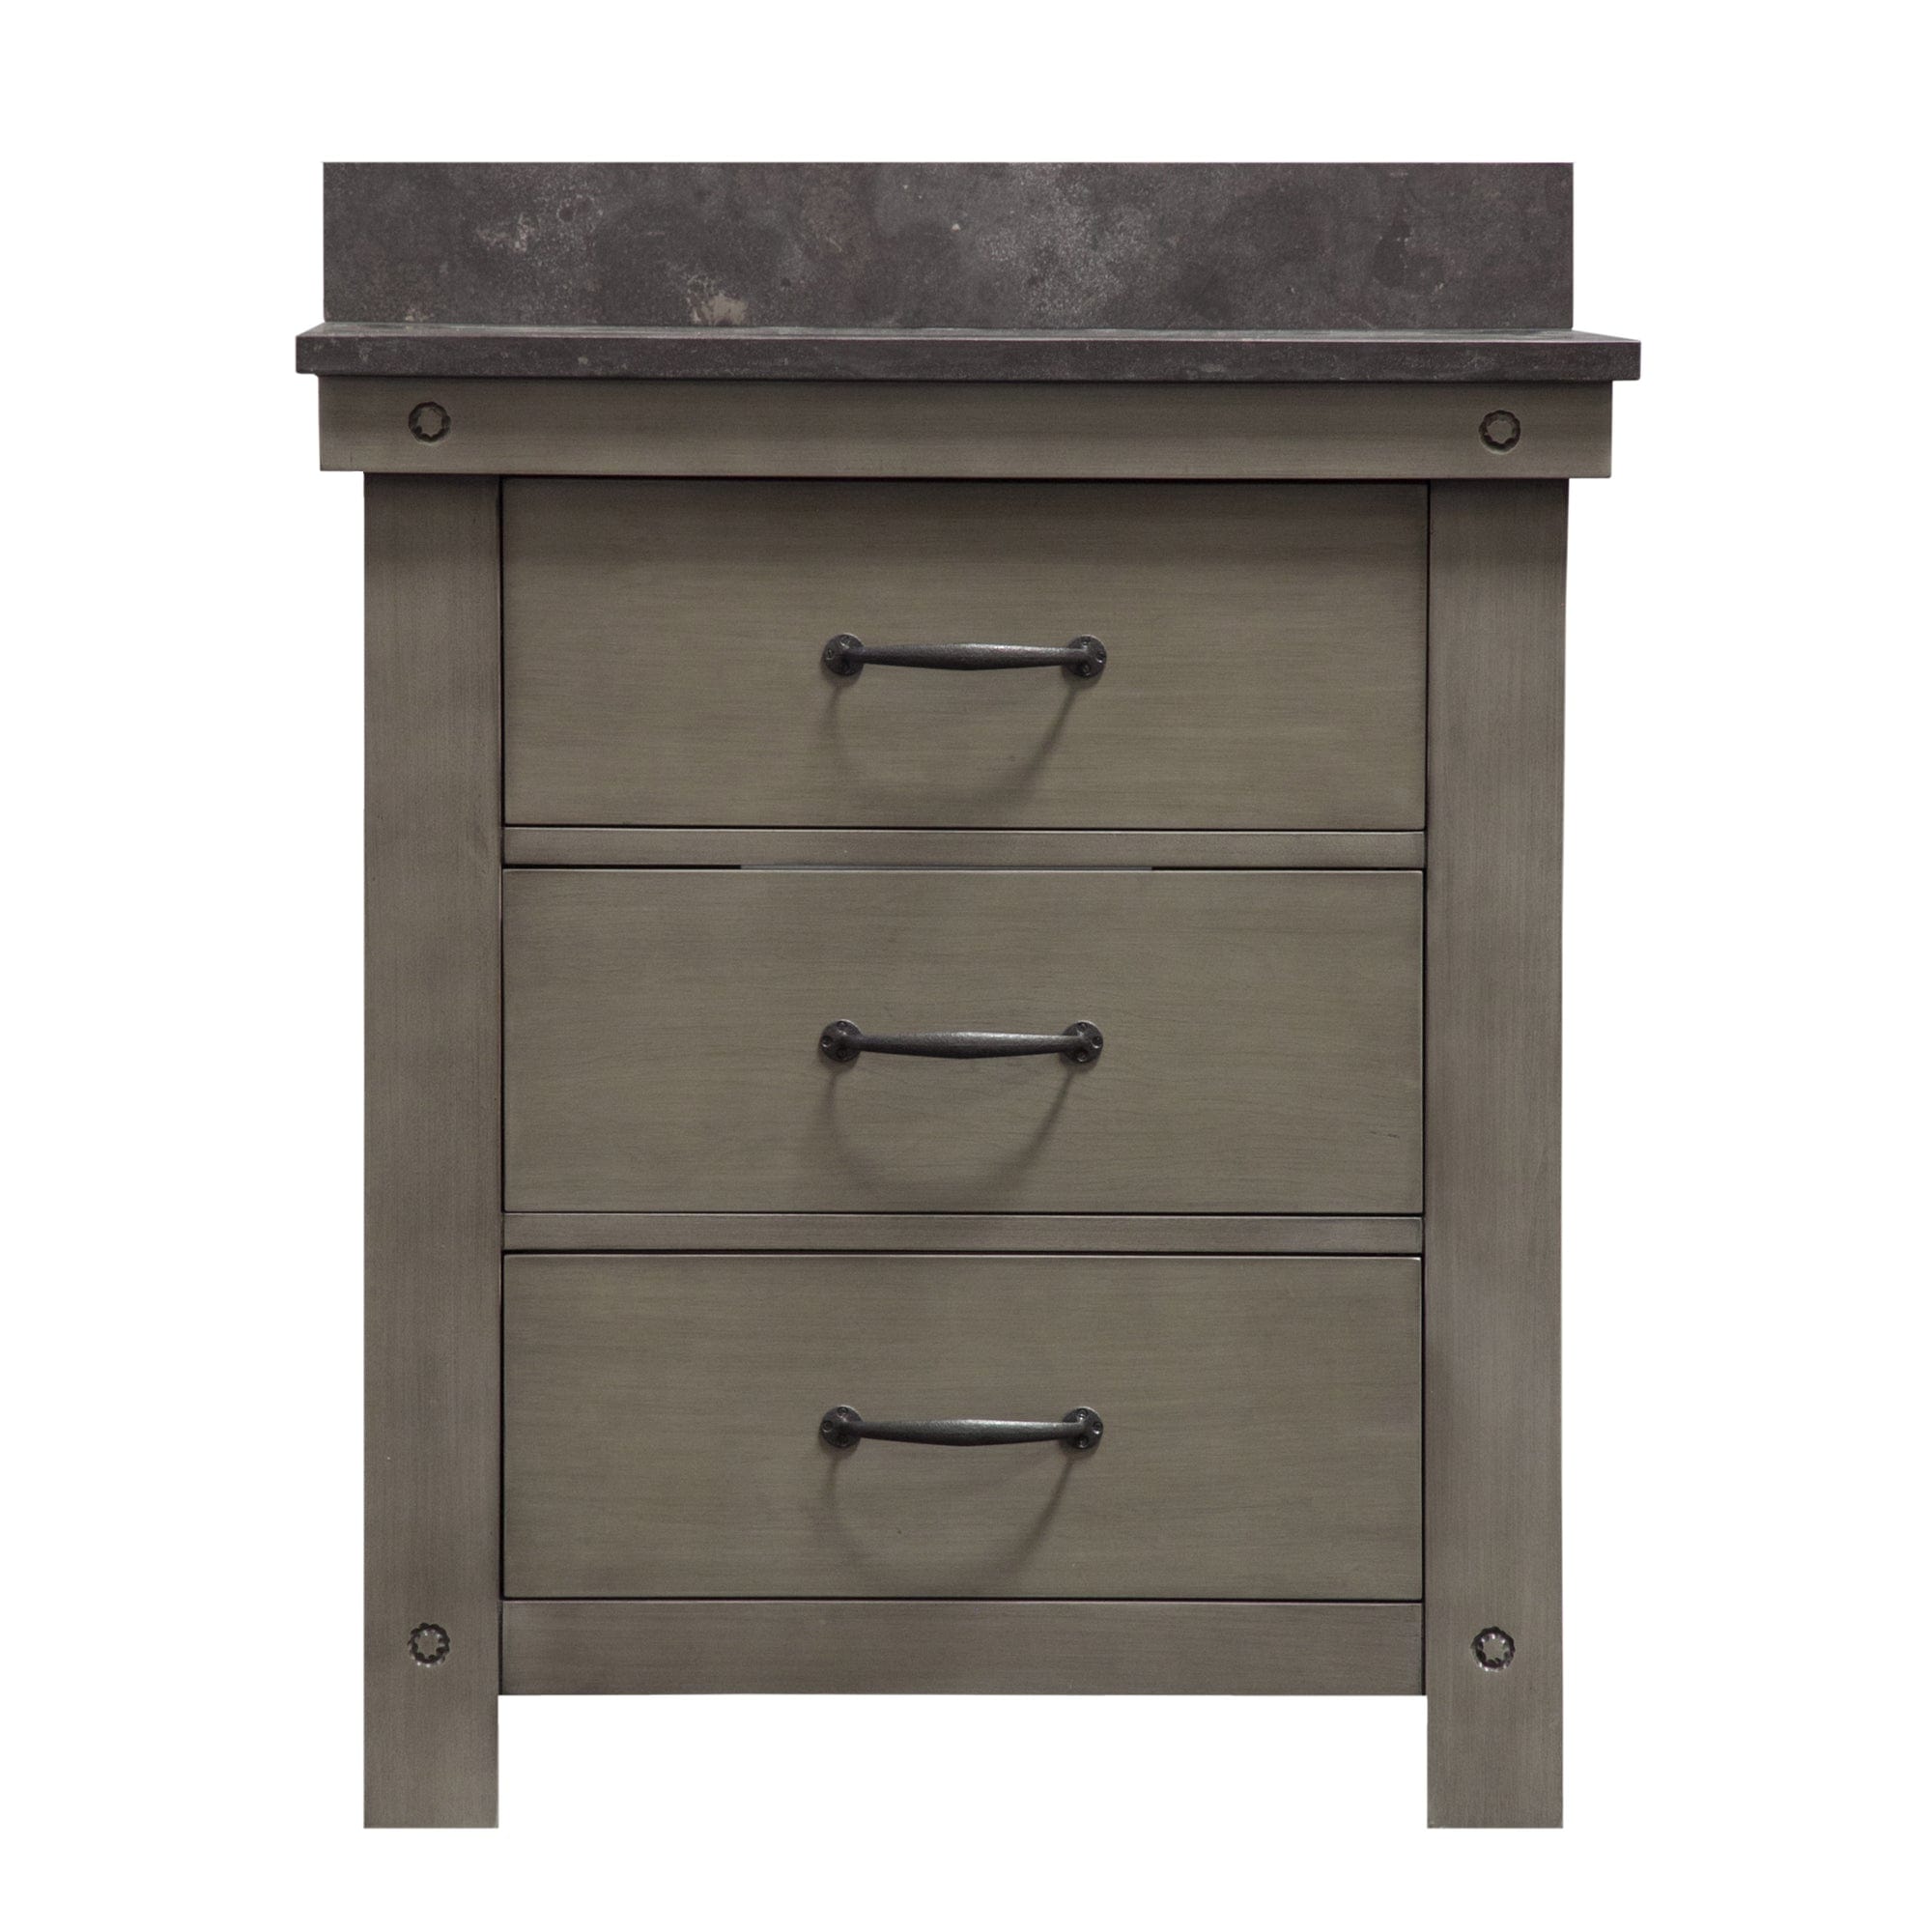 30 Inch Grizzle Grey Single Sink Bathroom Vanity With Faucet With Blue Limestone Counter Top From The ABERDEEN Collection - Molaix732030749610Bathroom VanitiesAB30BL03GG-000BX1203